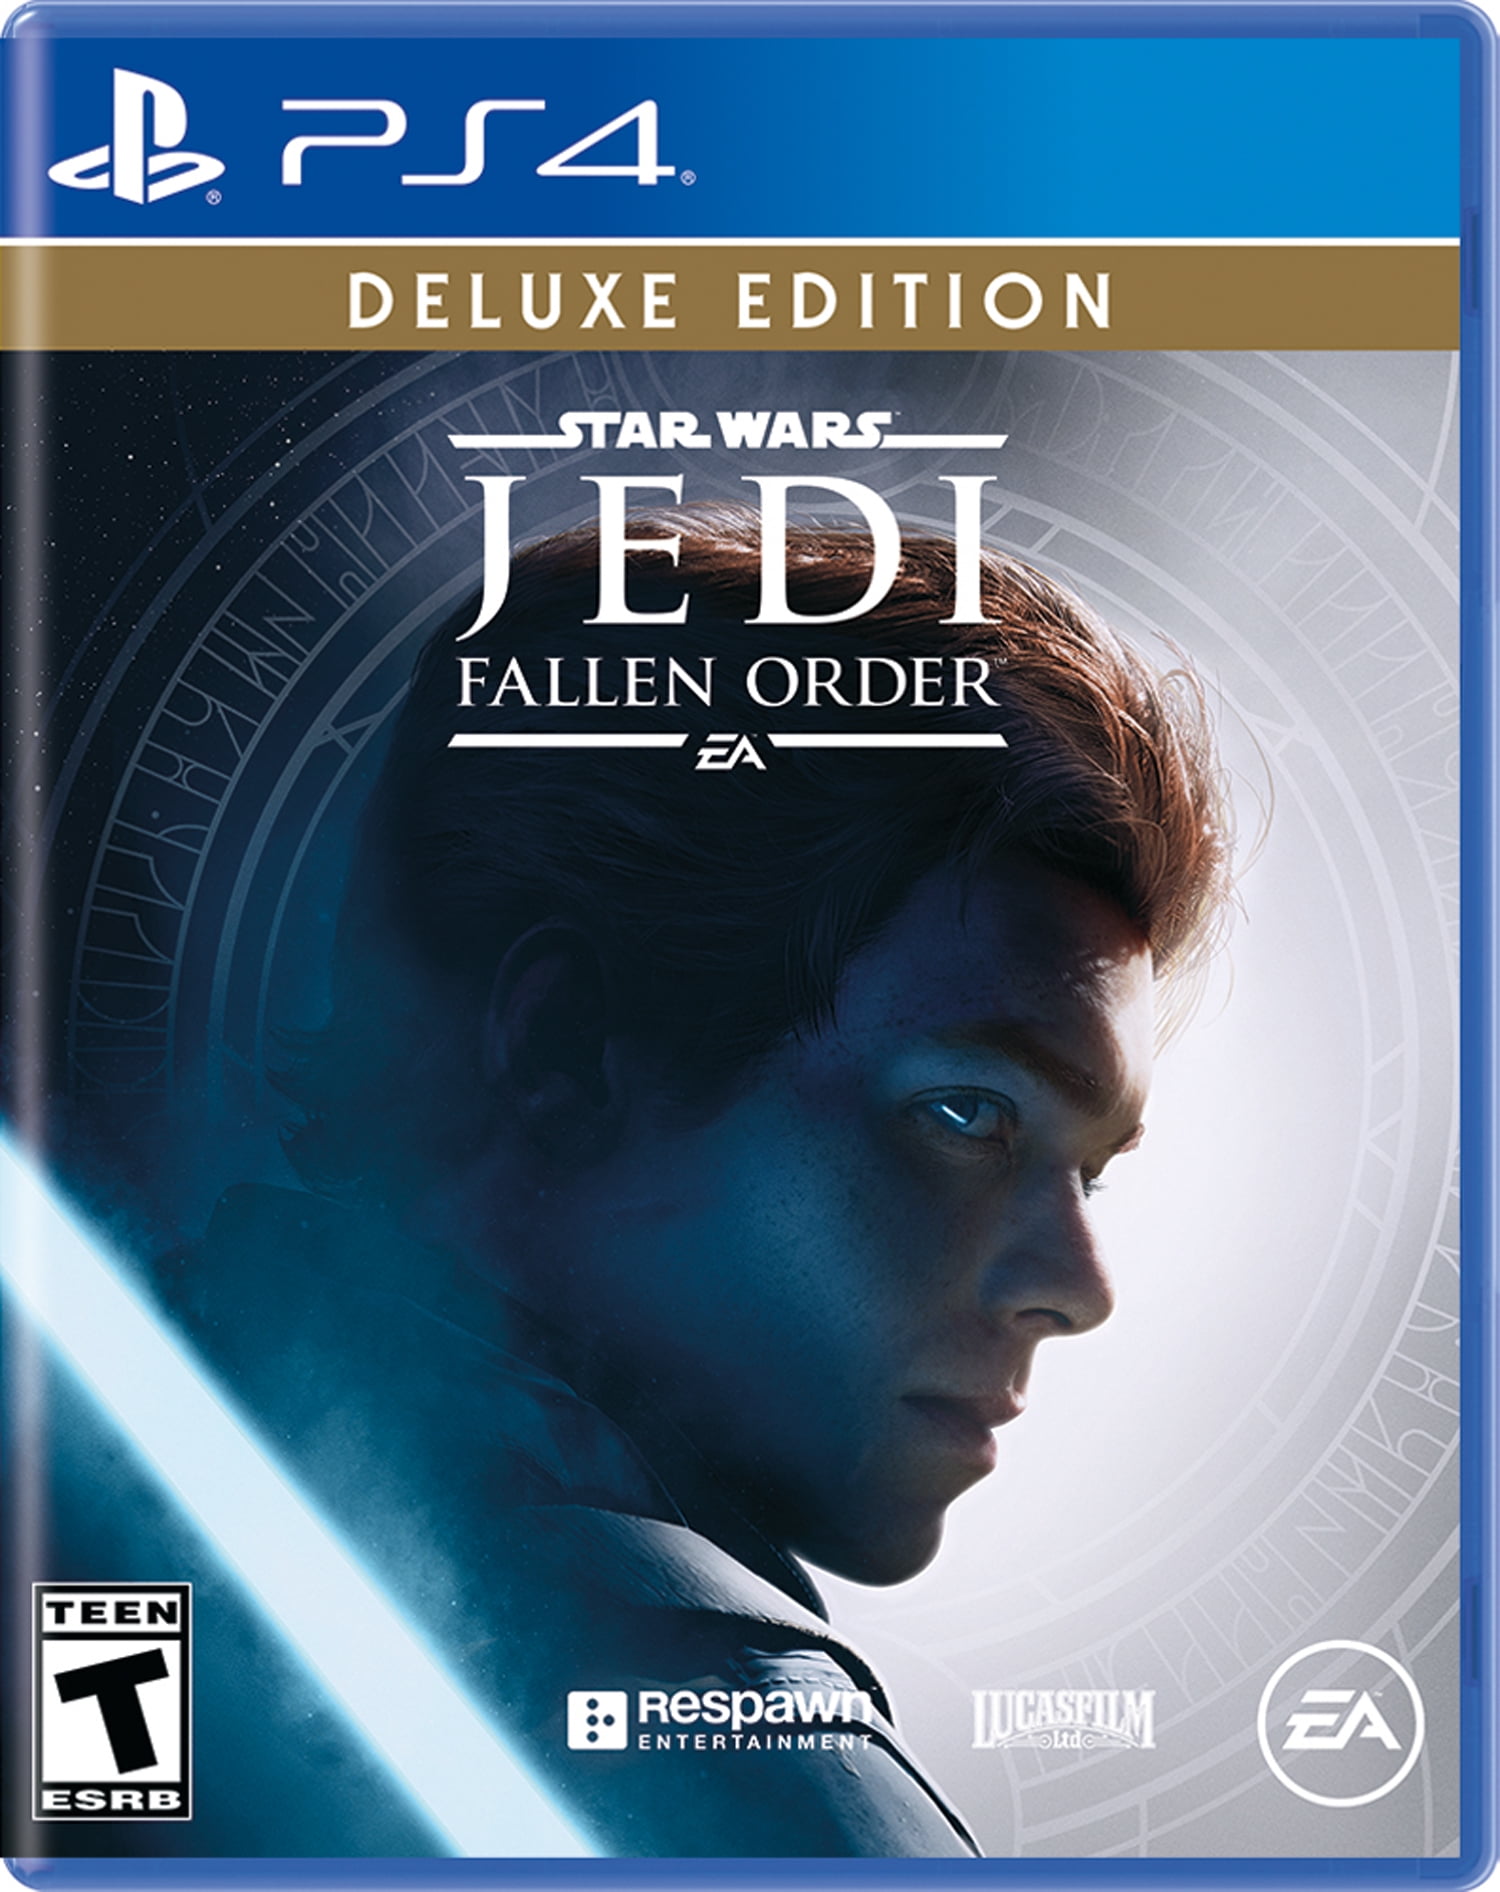 Star Wars Jedi: Order Deluxe Edition, Electronic Arts, PlayStation 4, 014633376159 - Walmart.com